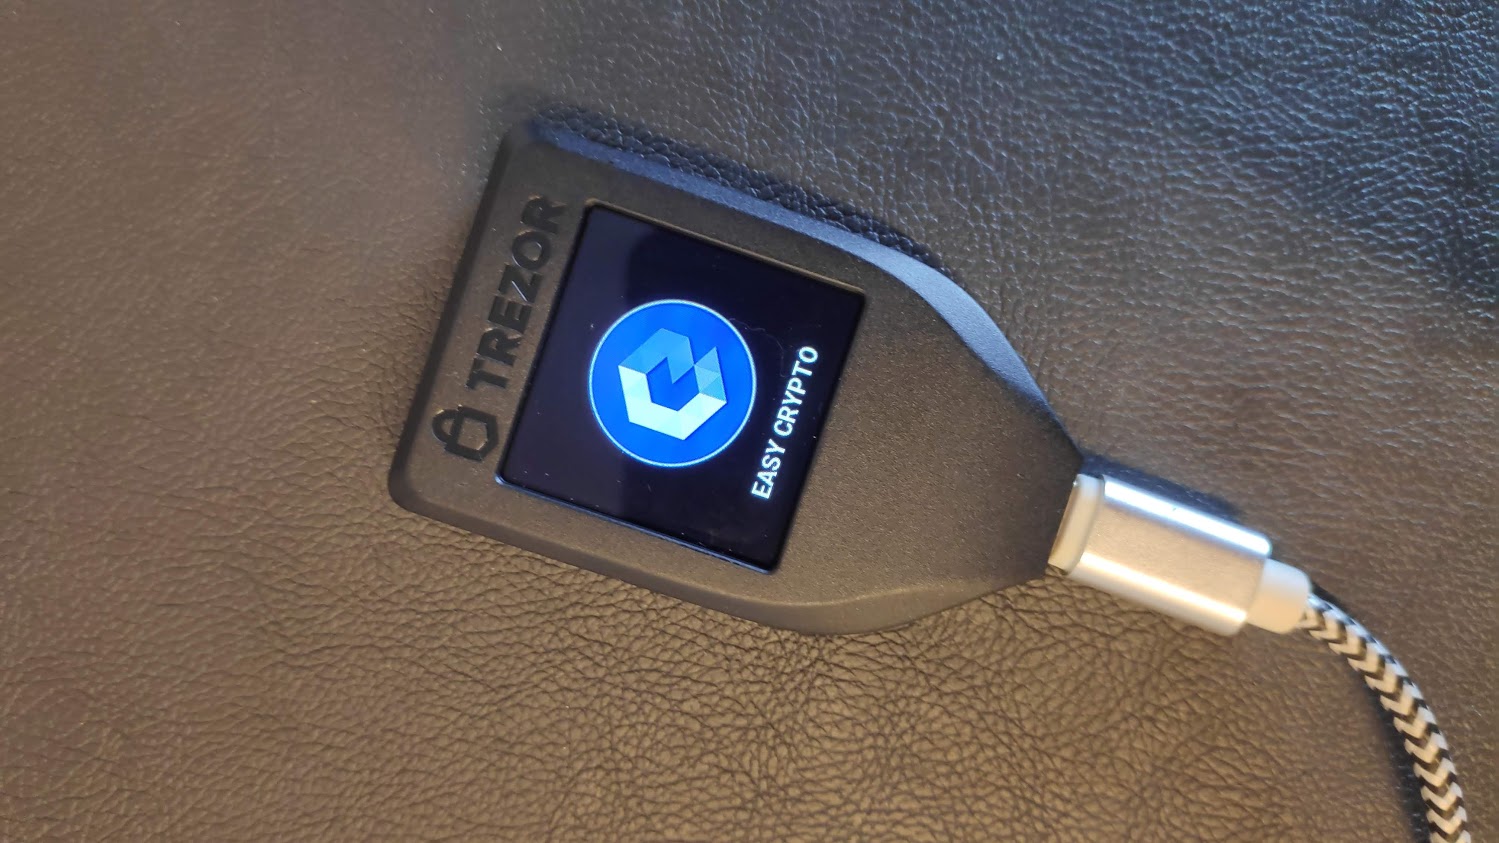 trezor-the-best-bitcoin-wallet-for-most-kiwis